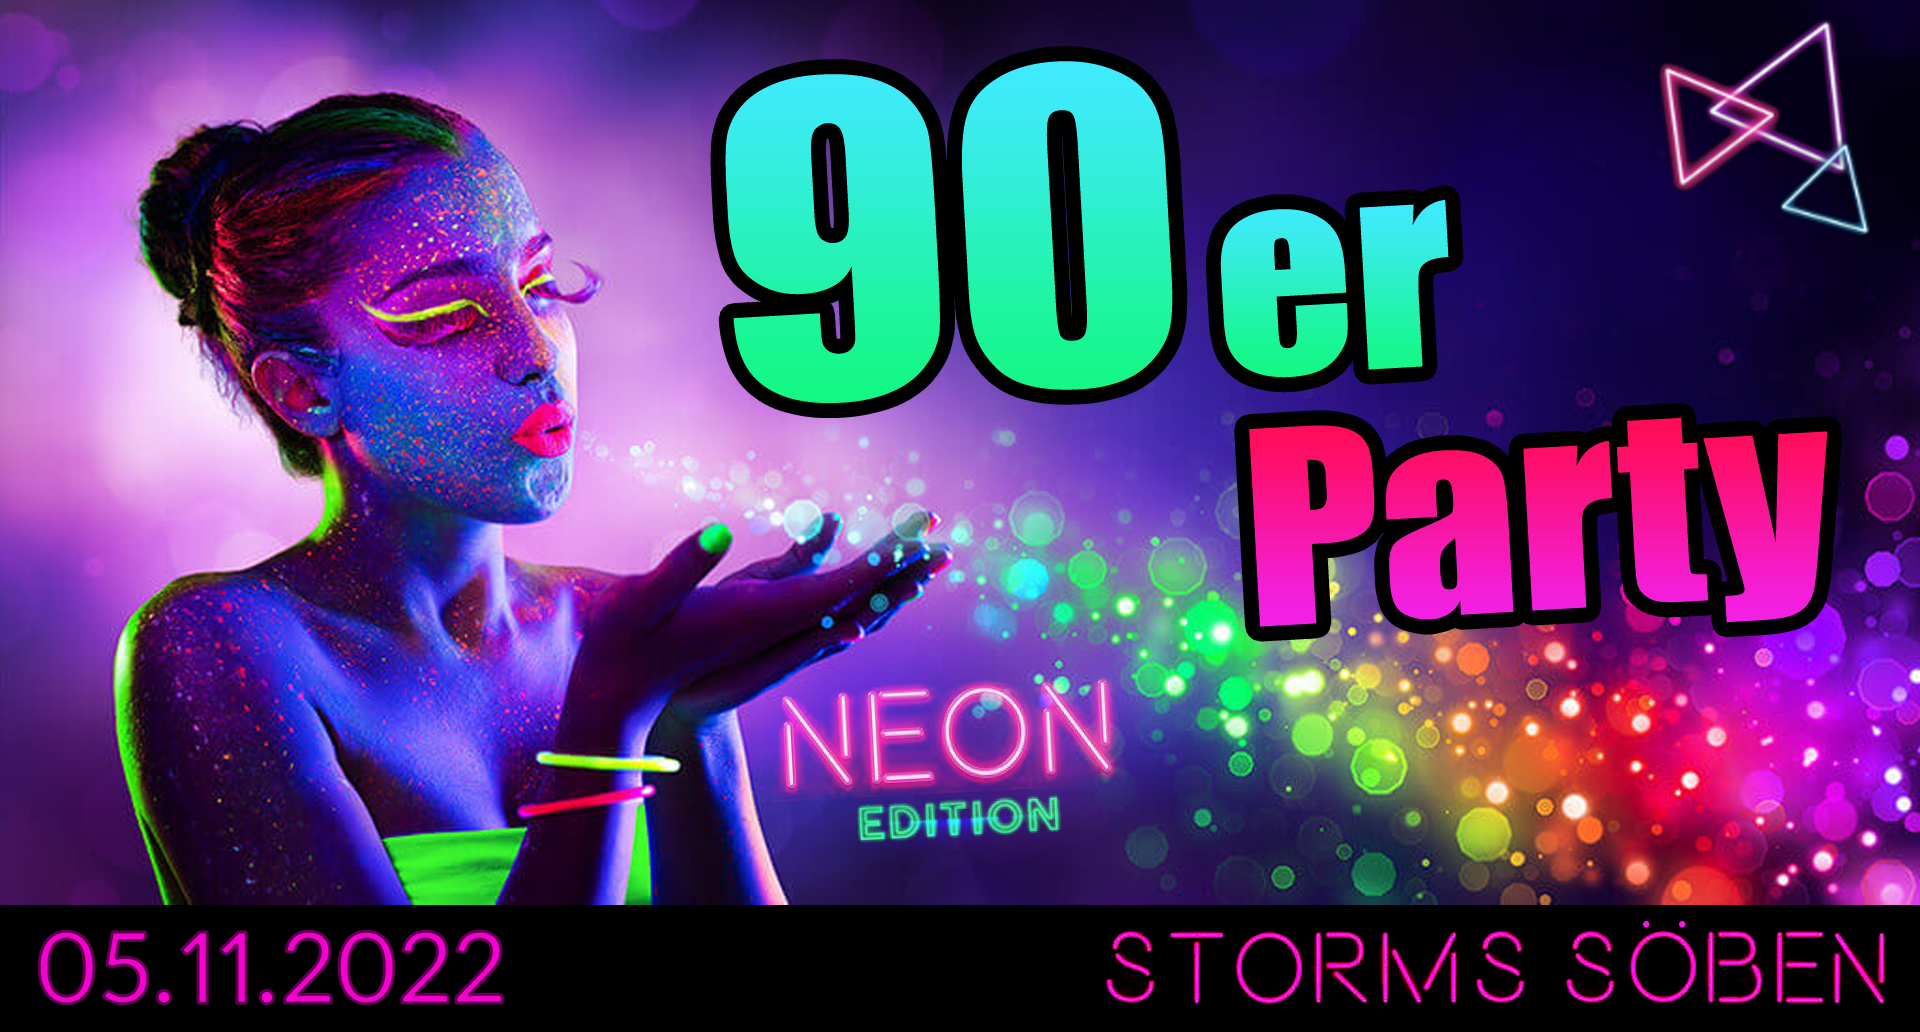 90er Party - Neon Edition -